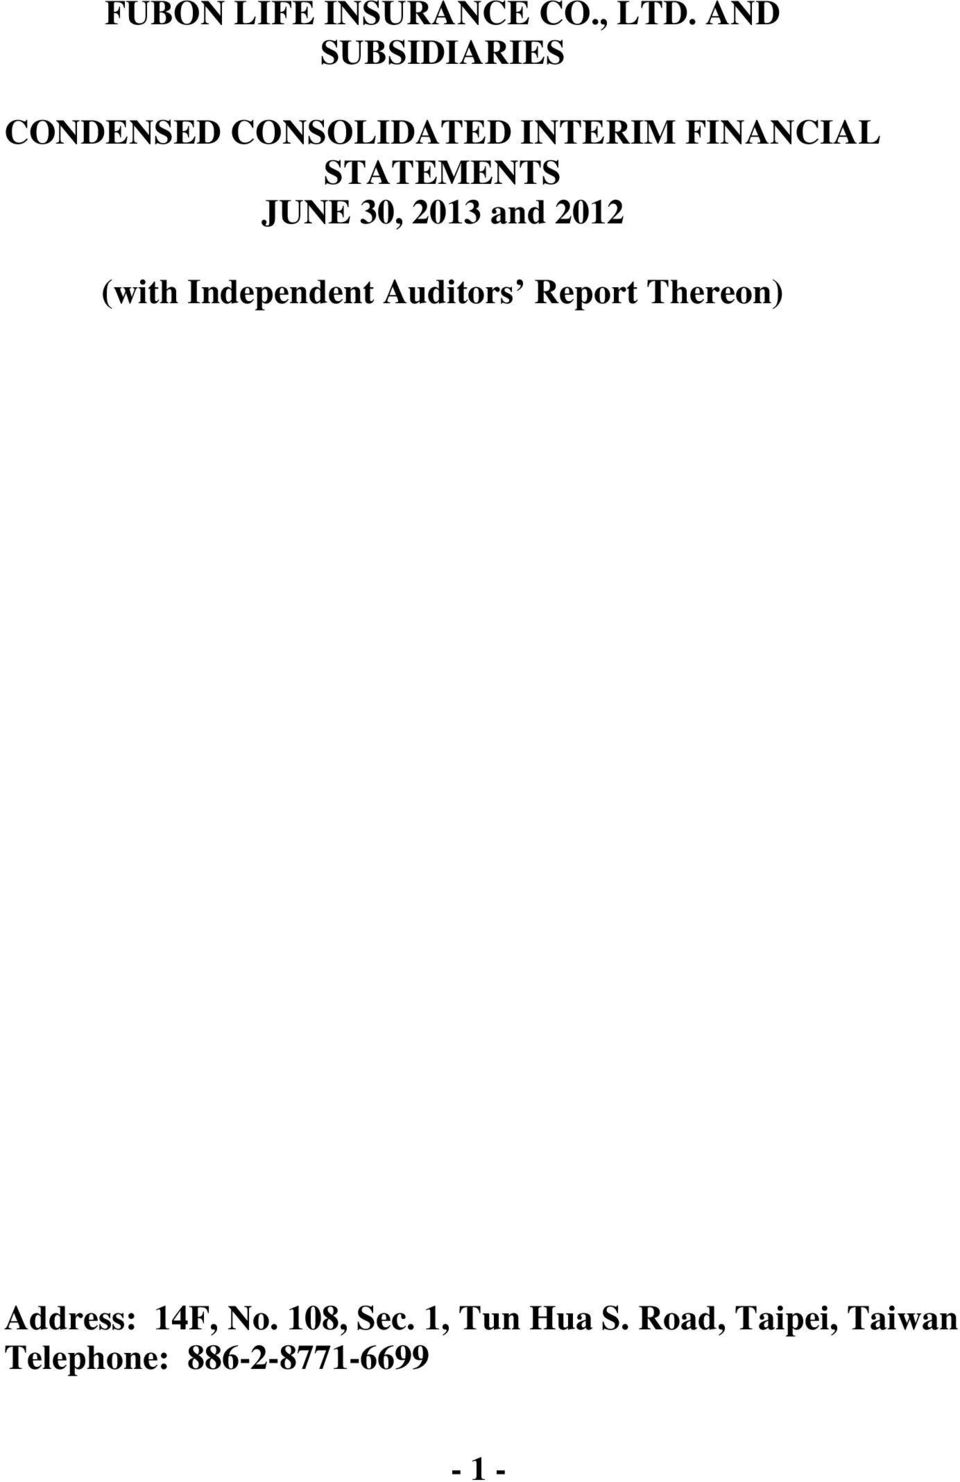 STATEMENTS JUNE 30, 2013 and 2012 (with Independent Auditors